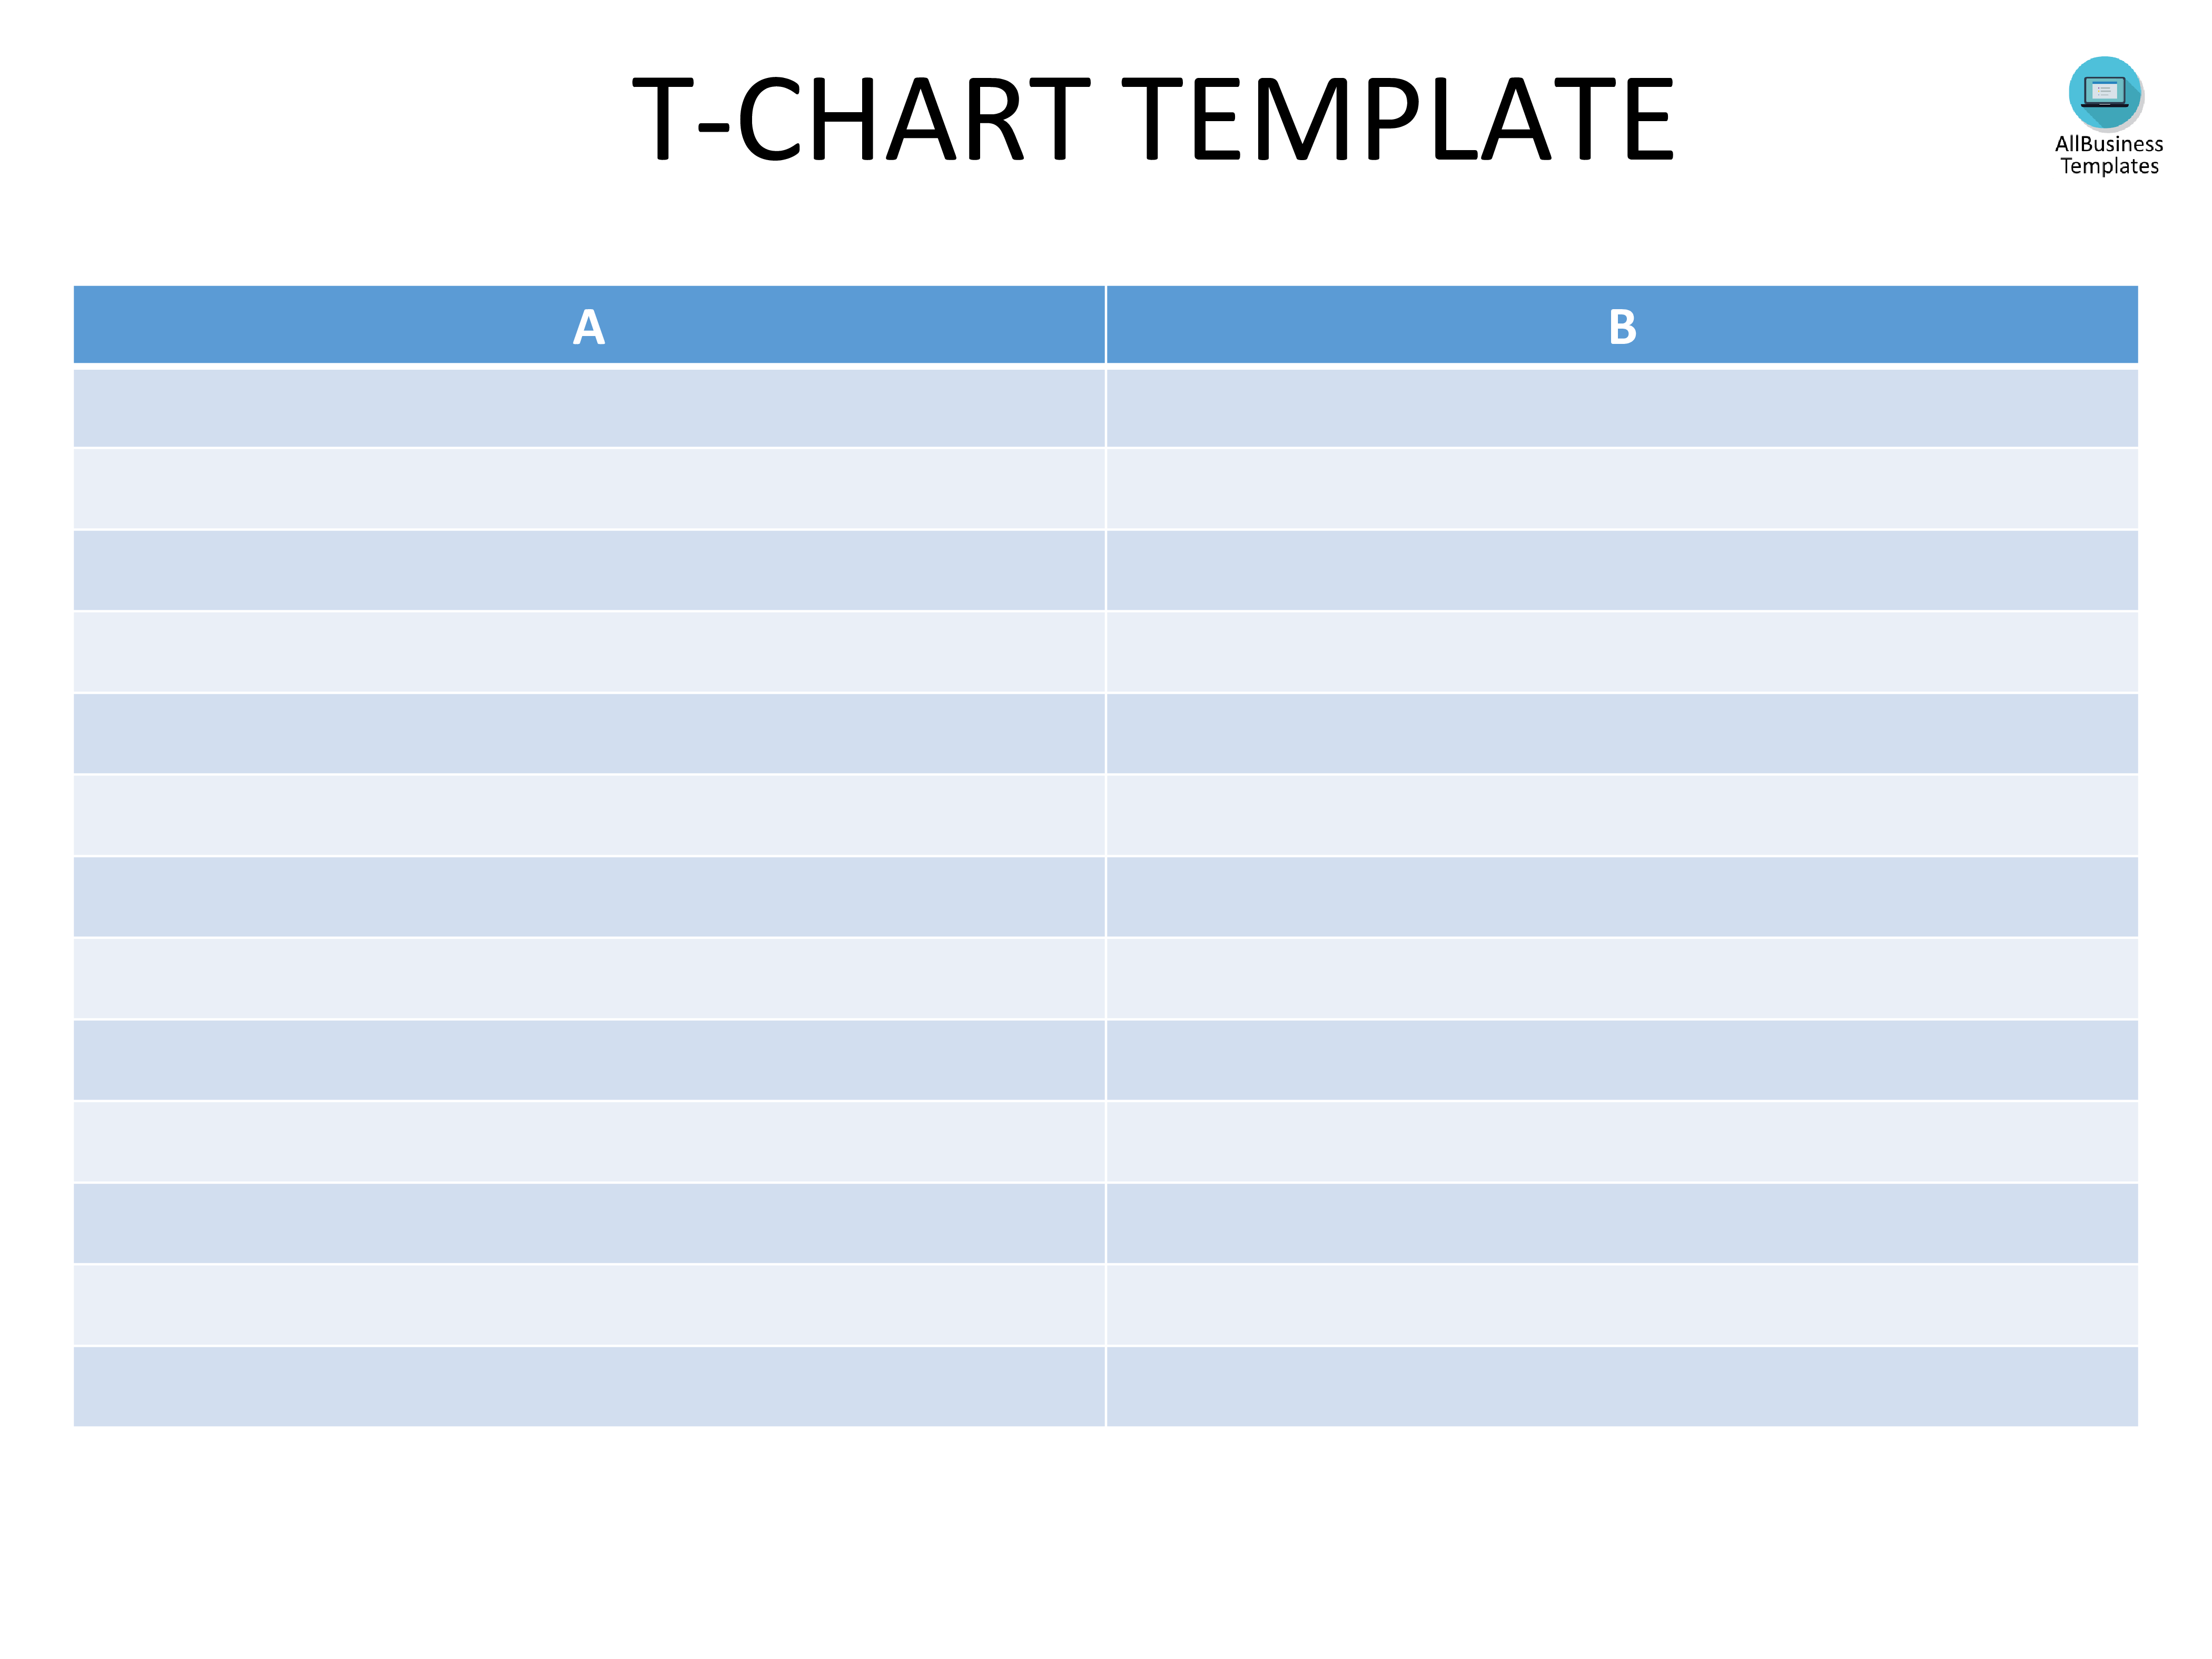 t chart powerpoint template